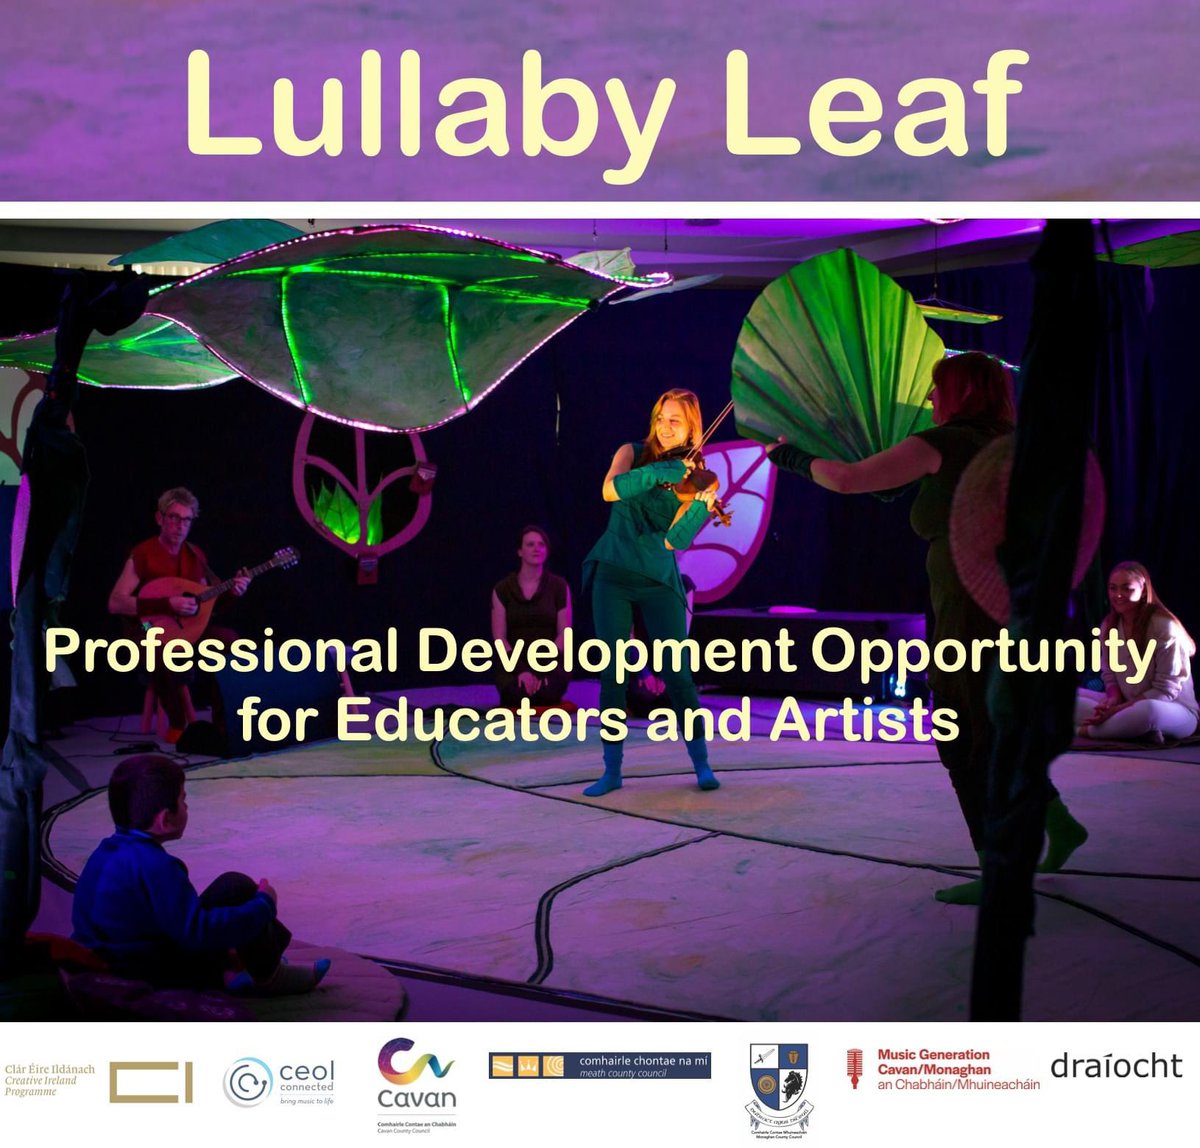 🍃 FREE sensory arts training for educators & artists in Cavan, Meath & Monaghan working with children w/ complex needs. Learn skills & gain experience in sensory arts with the creators of Lullaby Leaf 🍃 🌈Limited places. For info & to apply by 21st May: shorturl.at/dnoDP